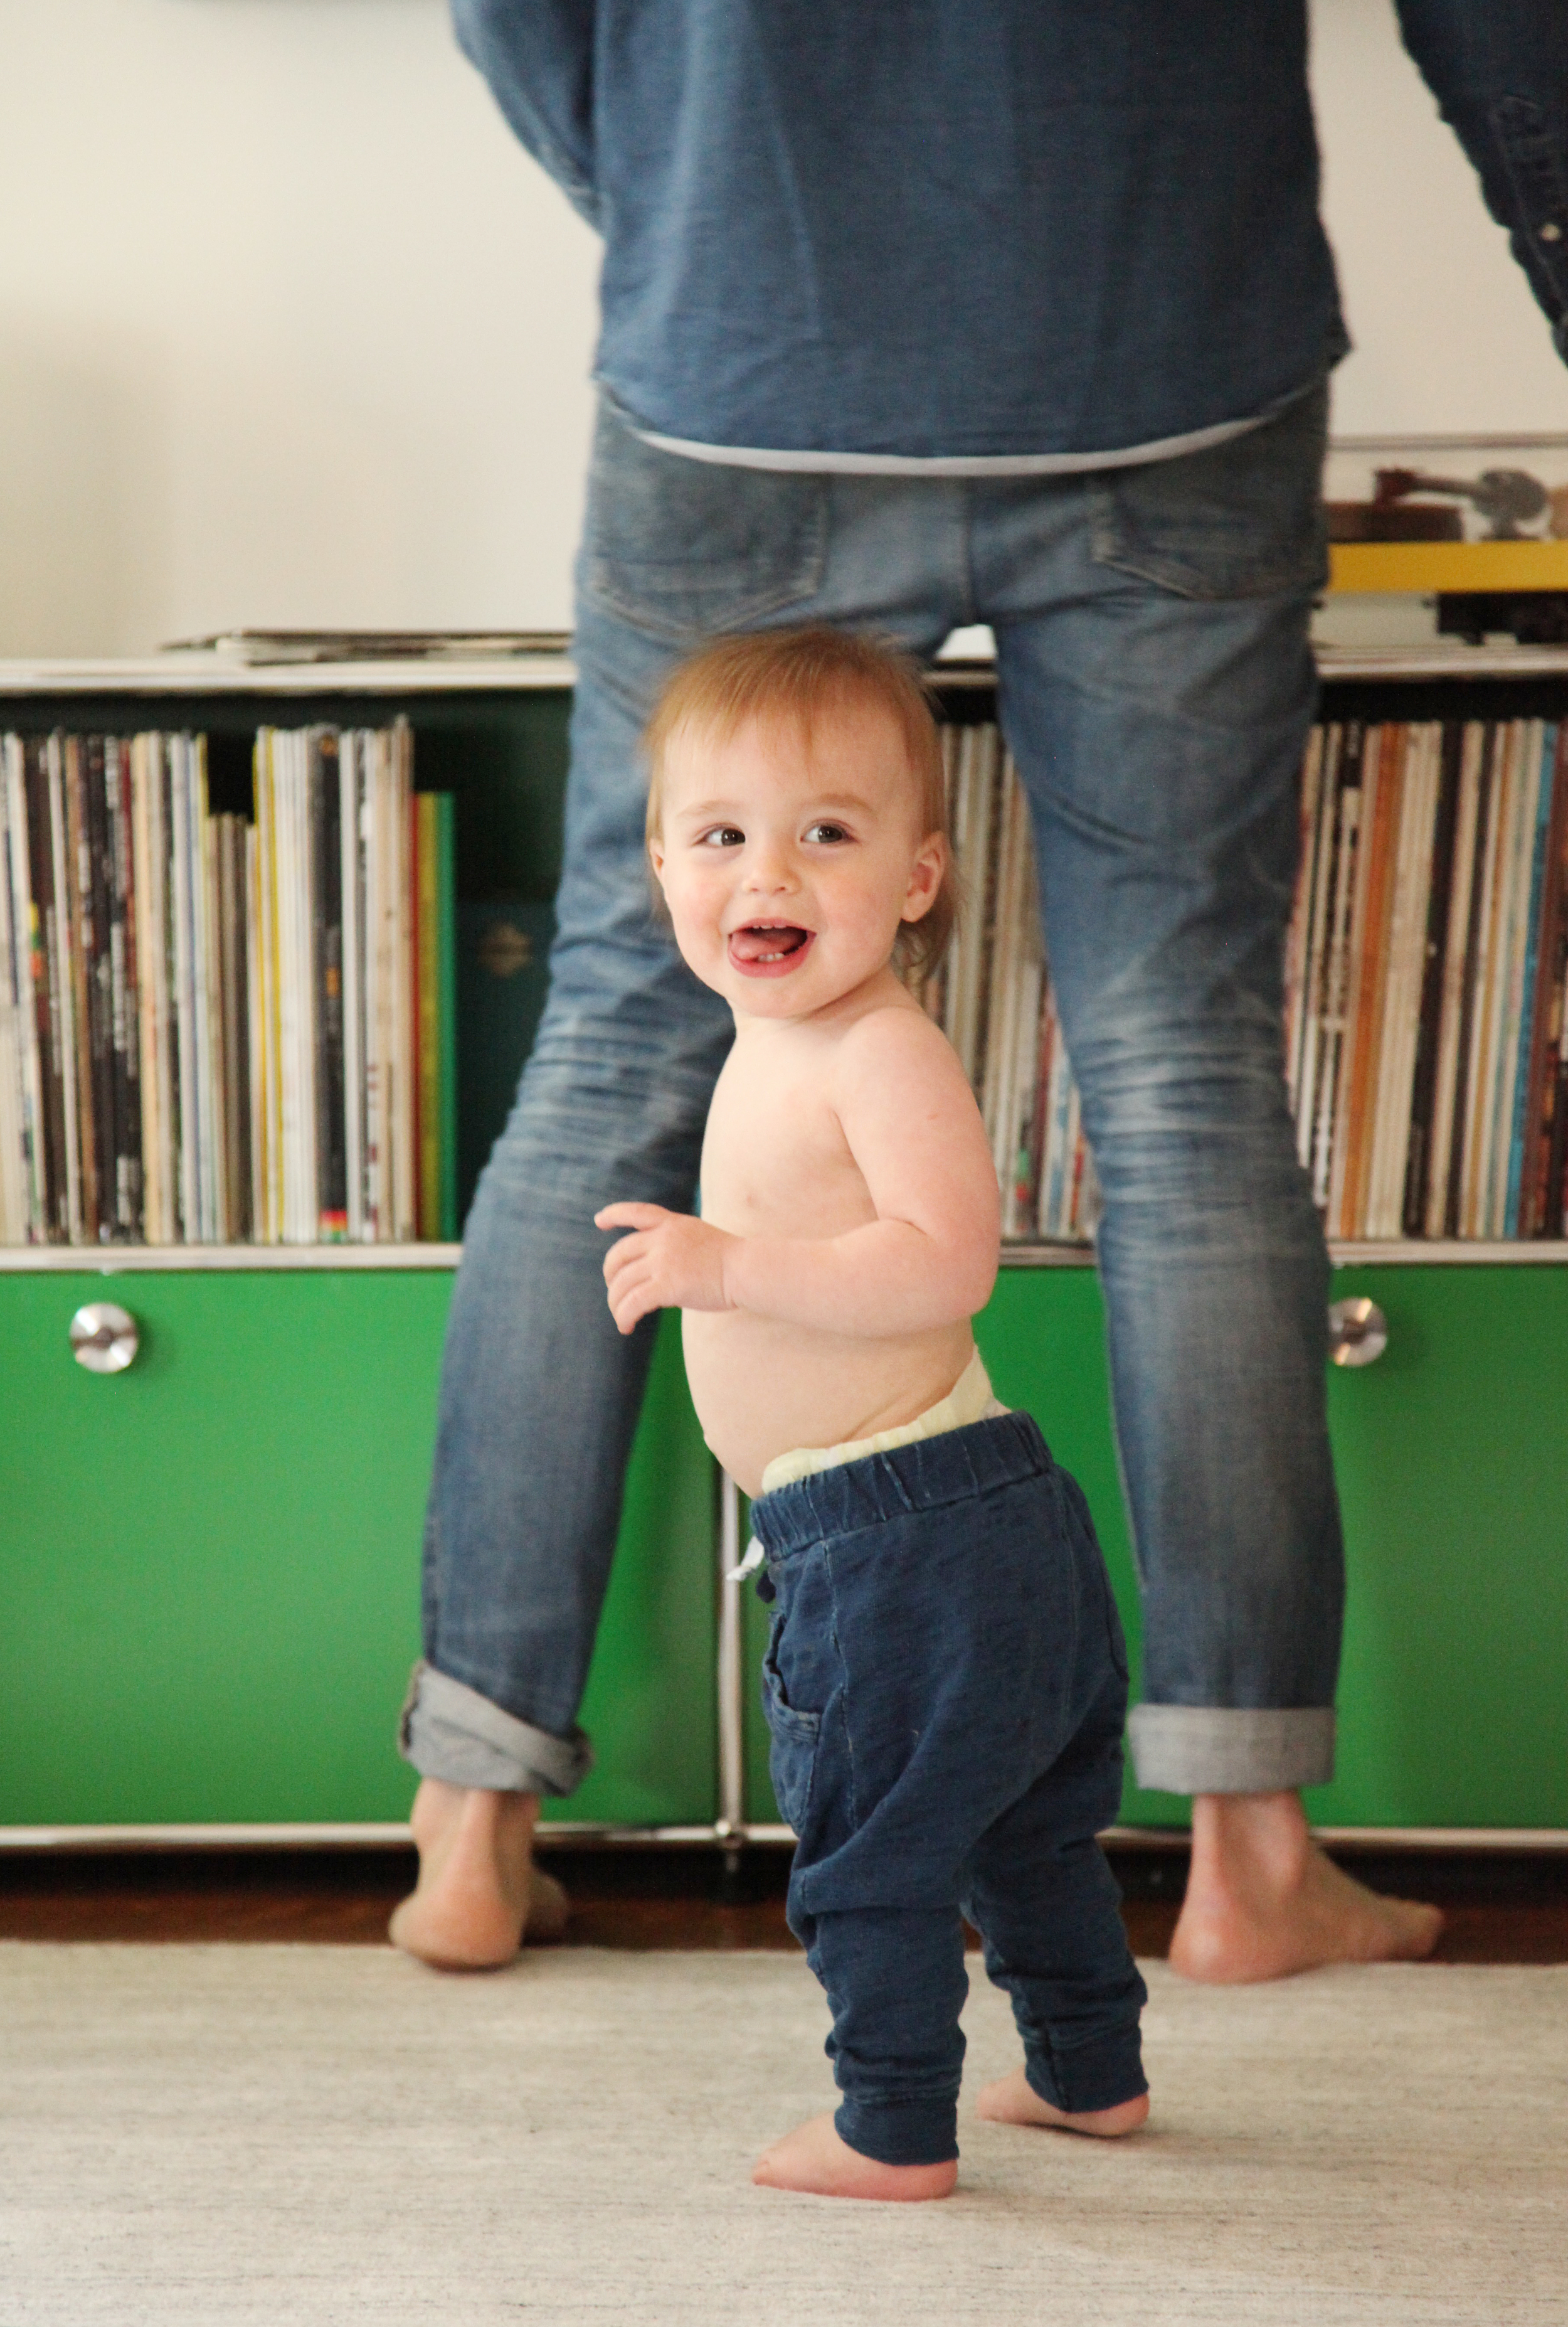  Tate's got jams in his bones. Dad's a vinyl guru with a serious collection.&nbsp; 